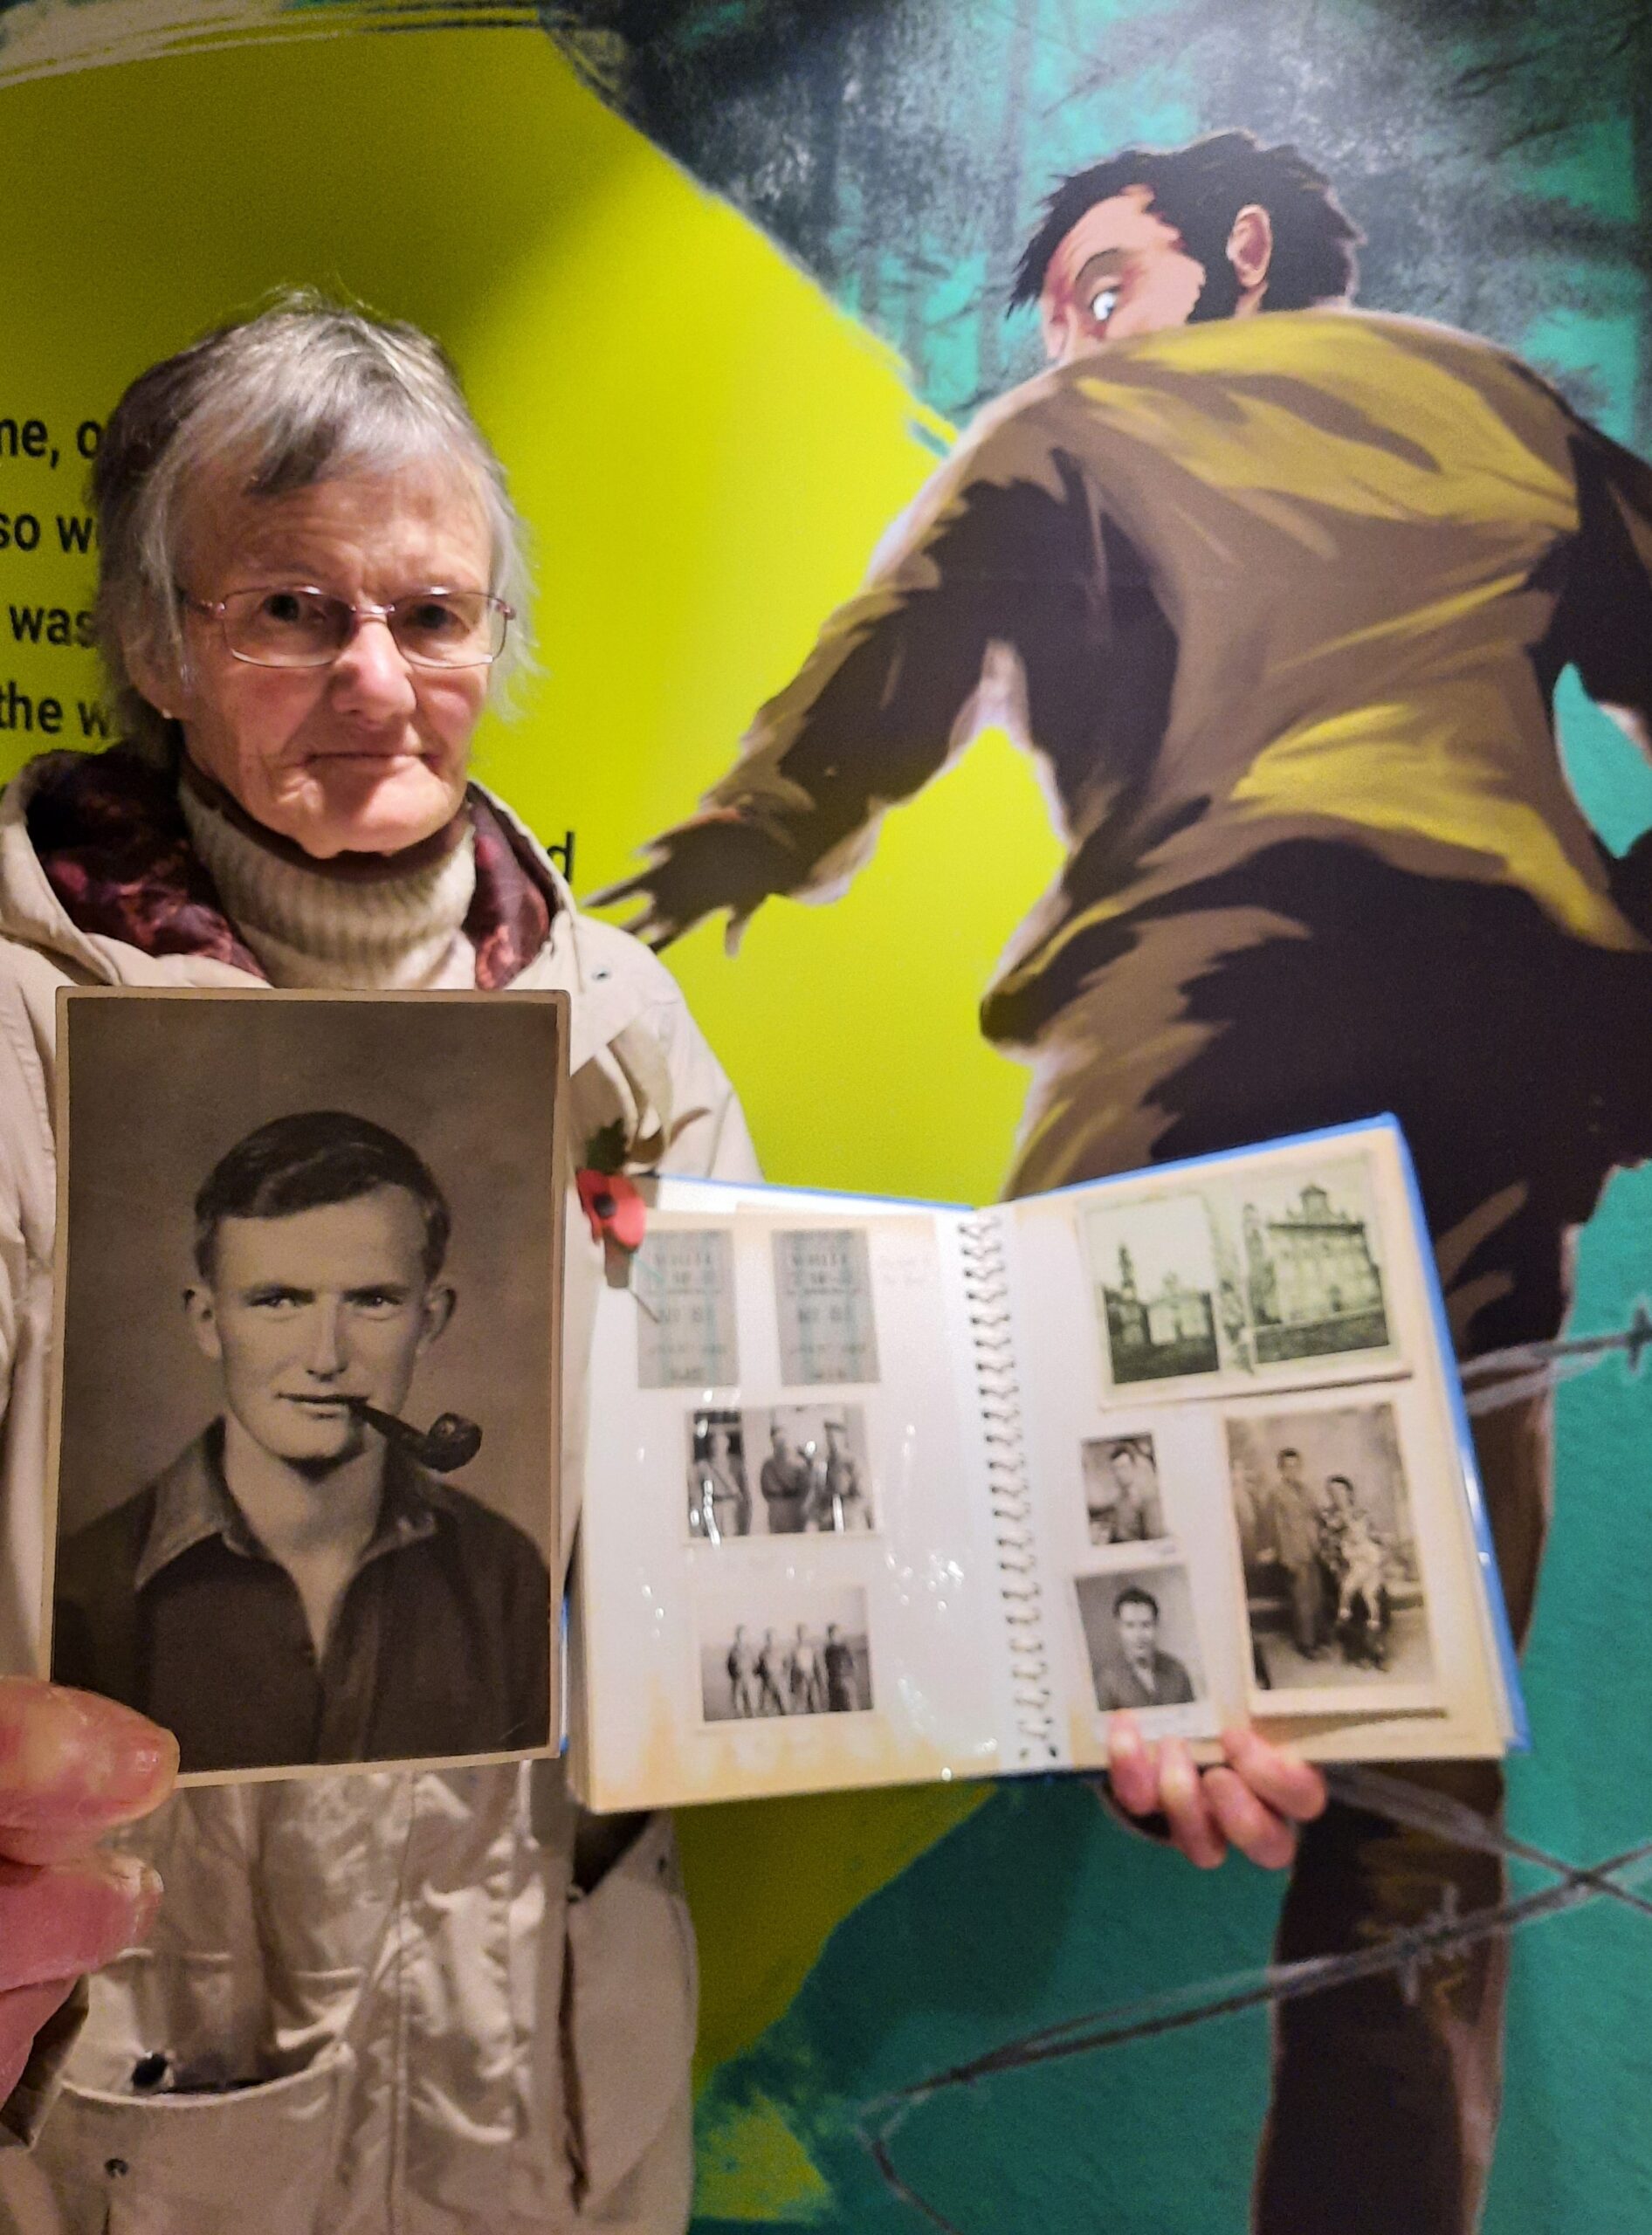 image of Noel Blunt's daughter with photo of him and a photo album dinated into the museum collection.